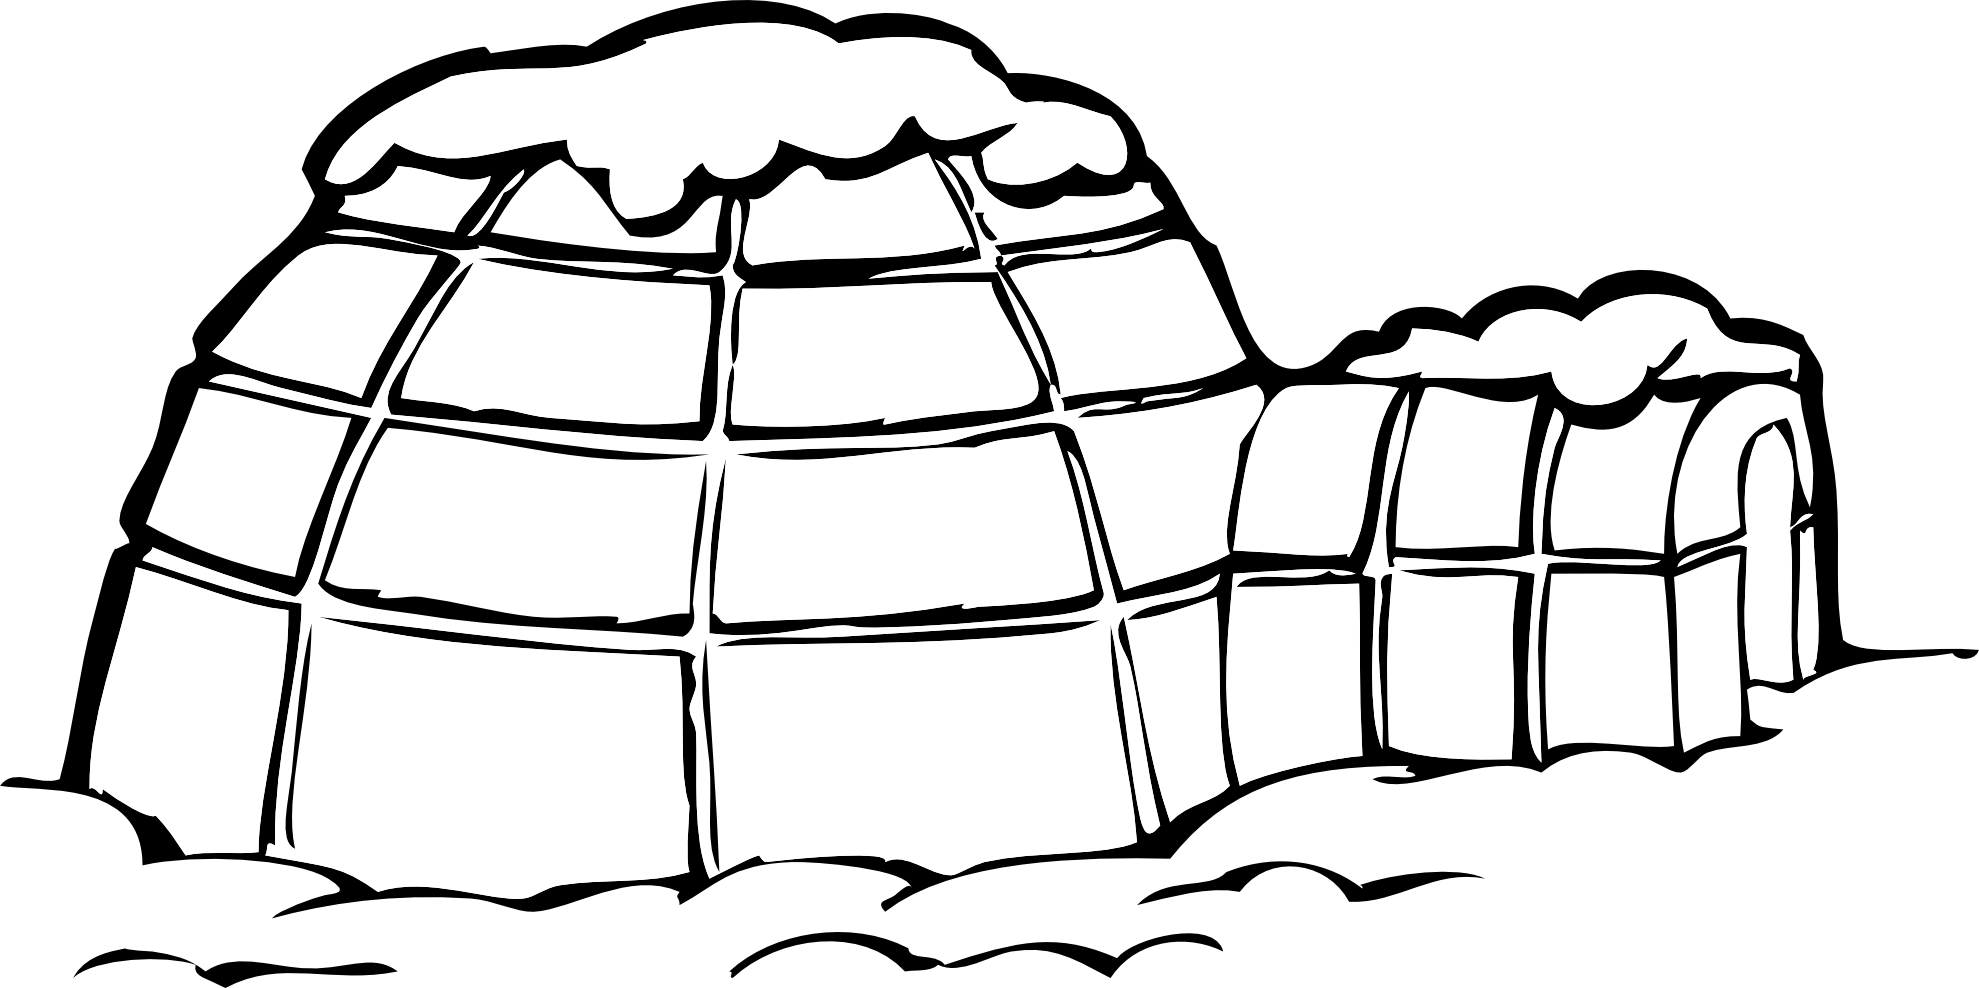 Free Igloo Clipart Black And White, Download Free Igloo Clipart Black